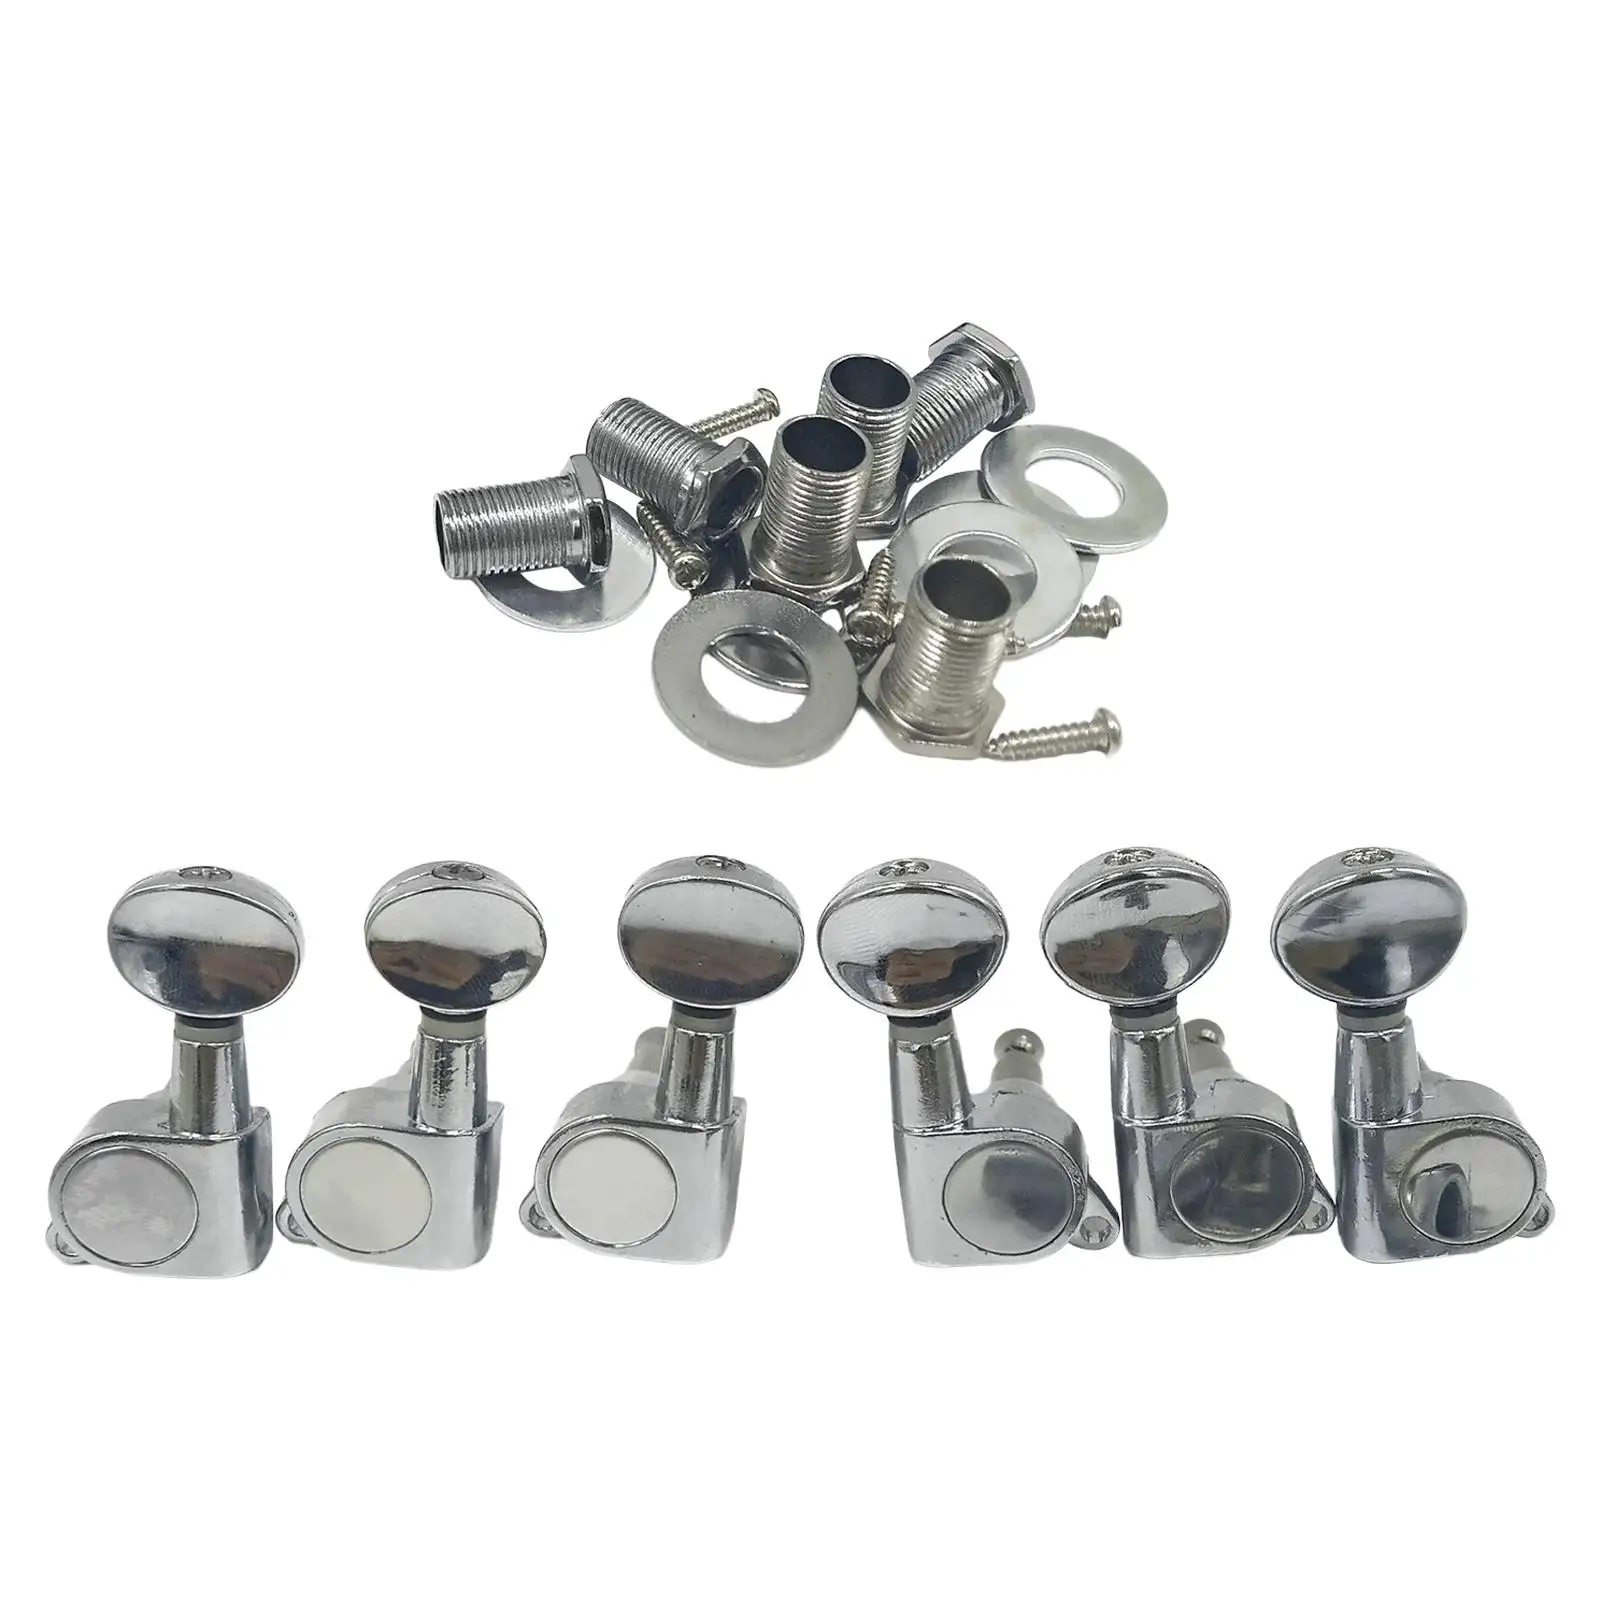 6 Pieces Guitar Tuning Peg Tuner Key Peg Knobs Tuners for Electric Guitar